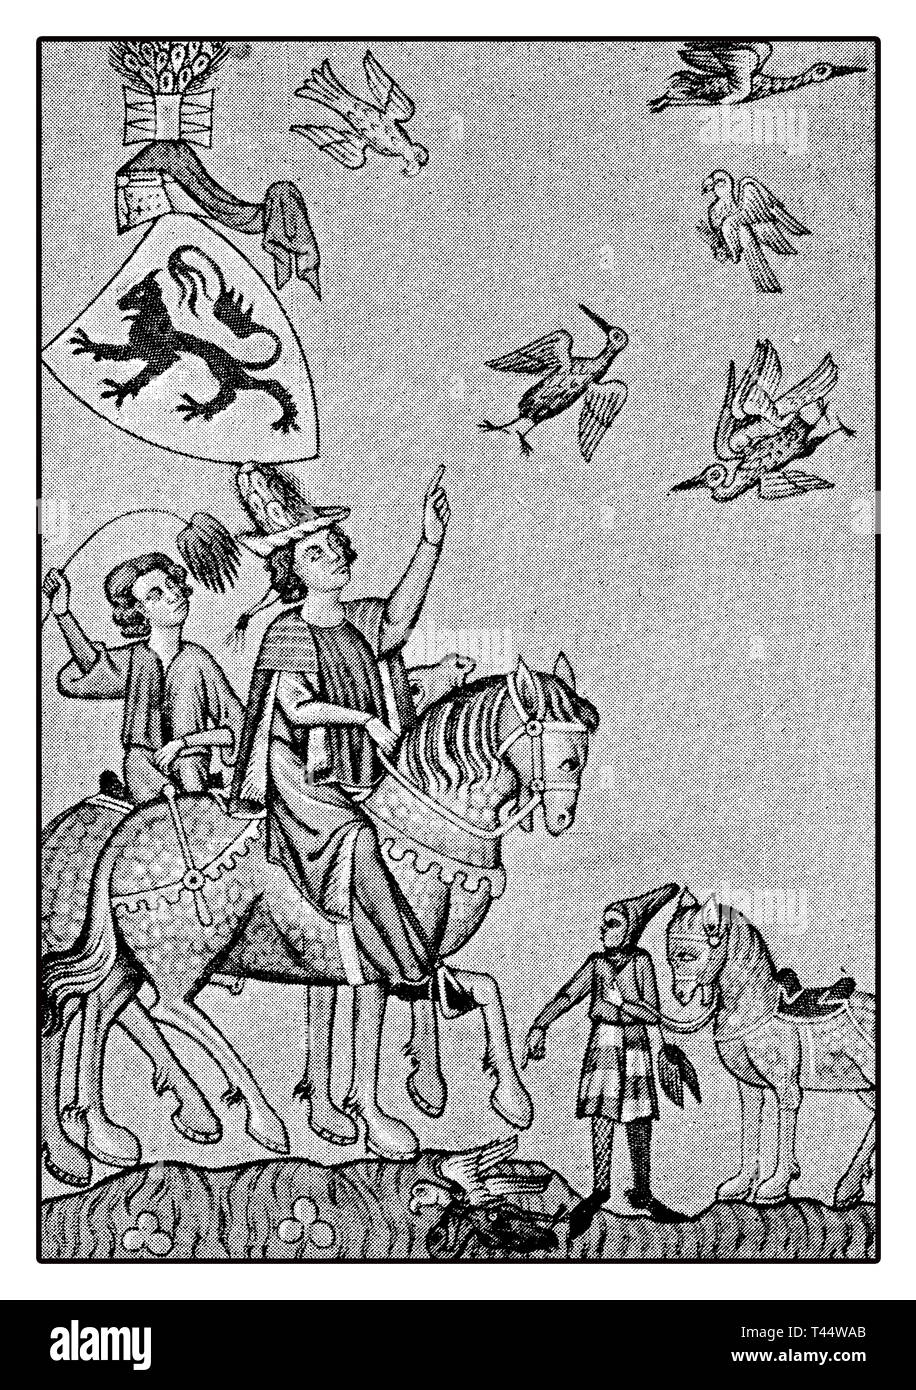 Old drawing describing the Knight life in the Hohenstaufen times, a  dynasty of German kings in the Middle Ages Stock Photo